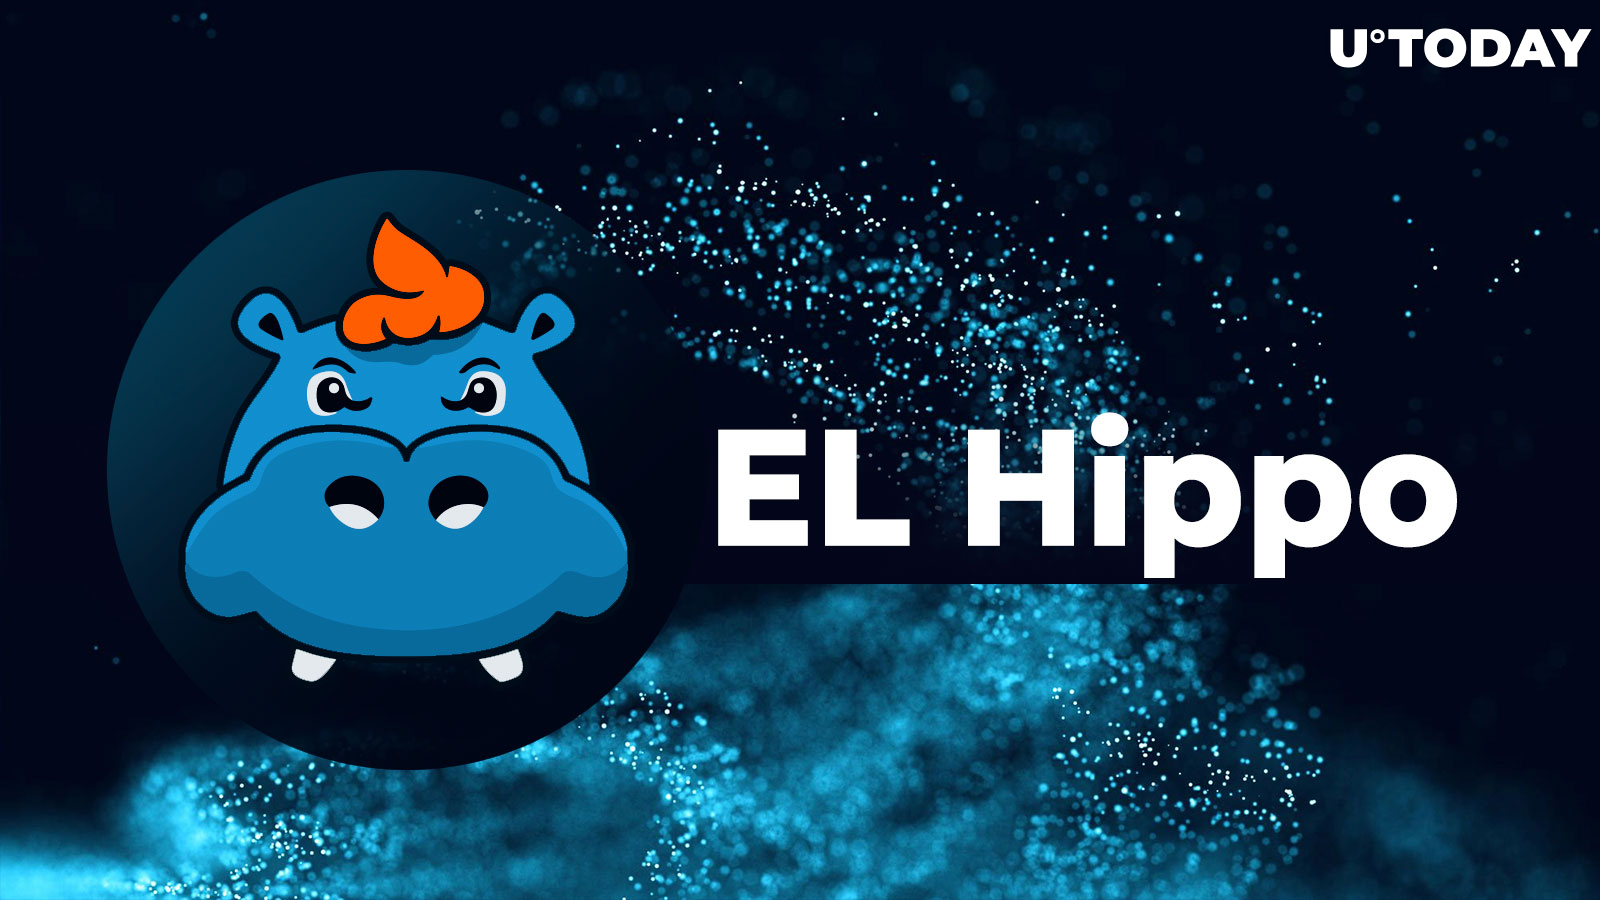 El Hippo (HIPP) Tests All-Time High as Terra Luna Classic (LUNC) Breaks Yearly Price Record